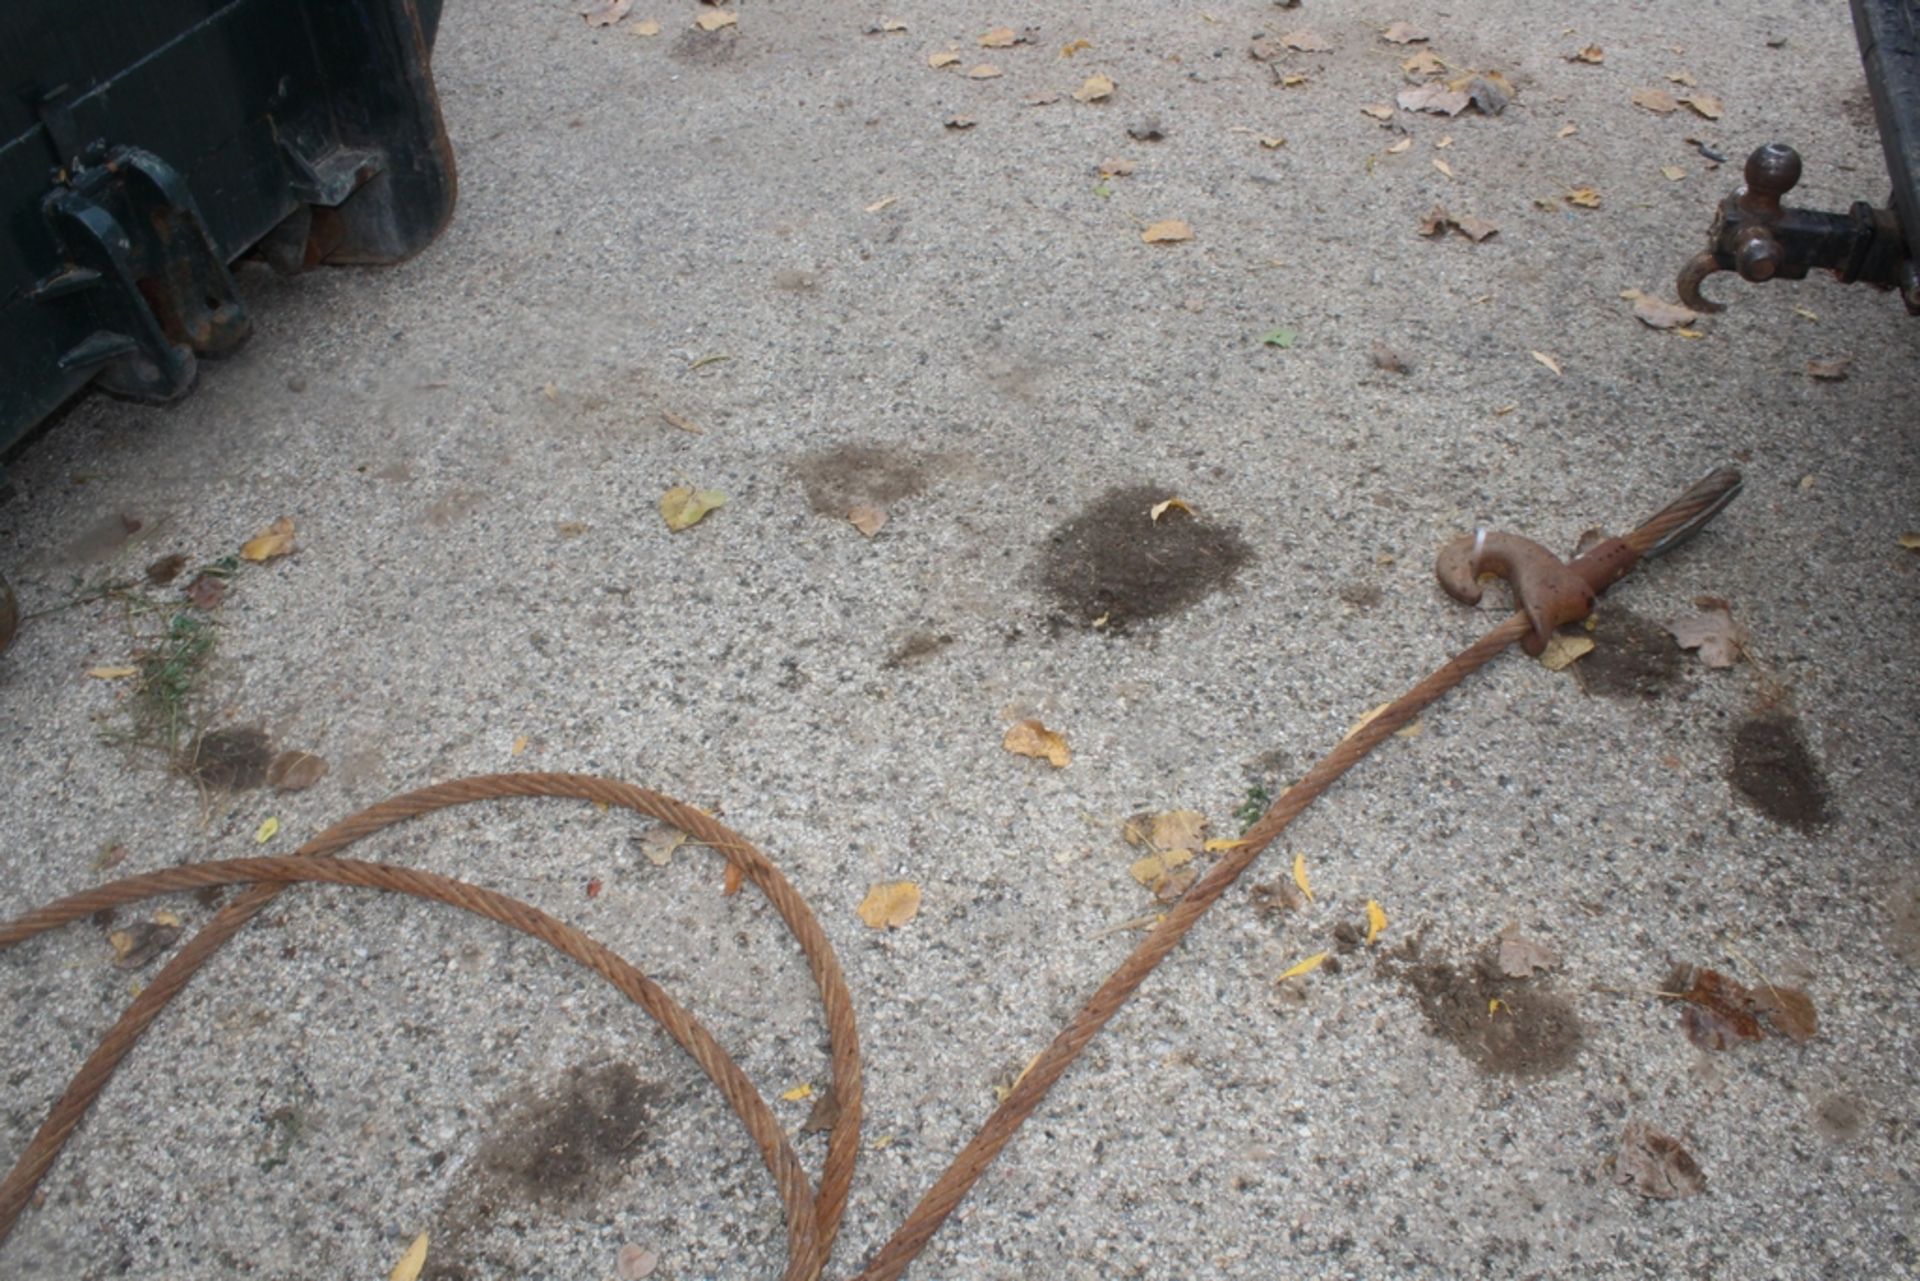 HEAVY DUTY 2 LEG LIFTING CABLE 10' LONG - Image 2 of 4